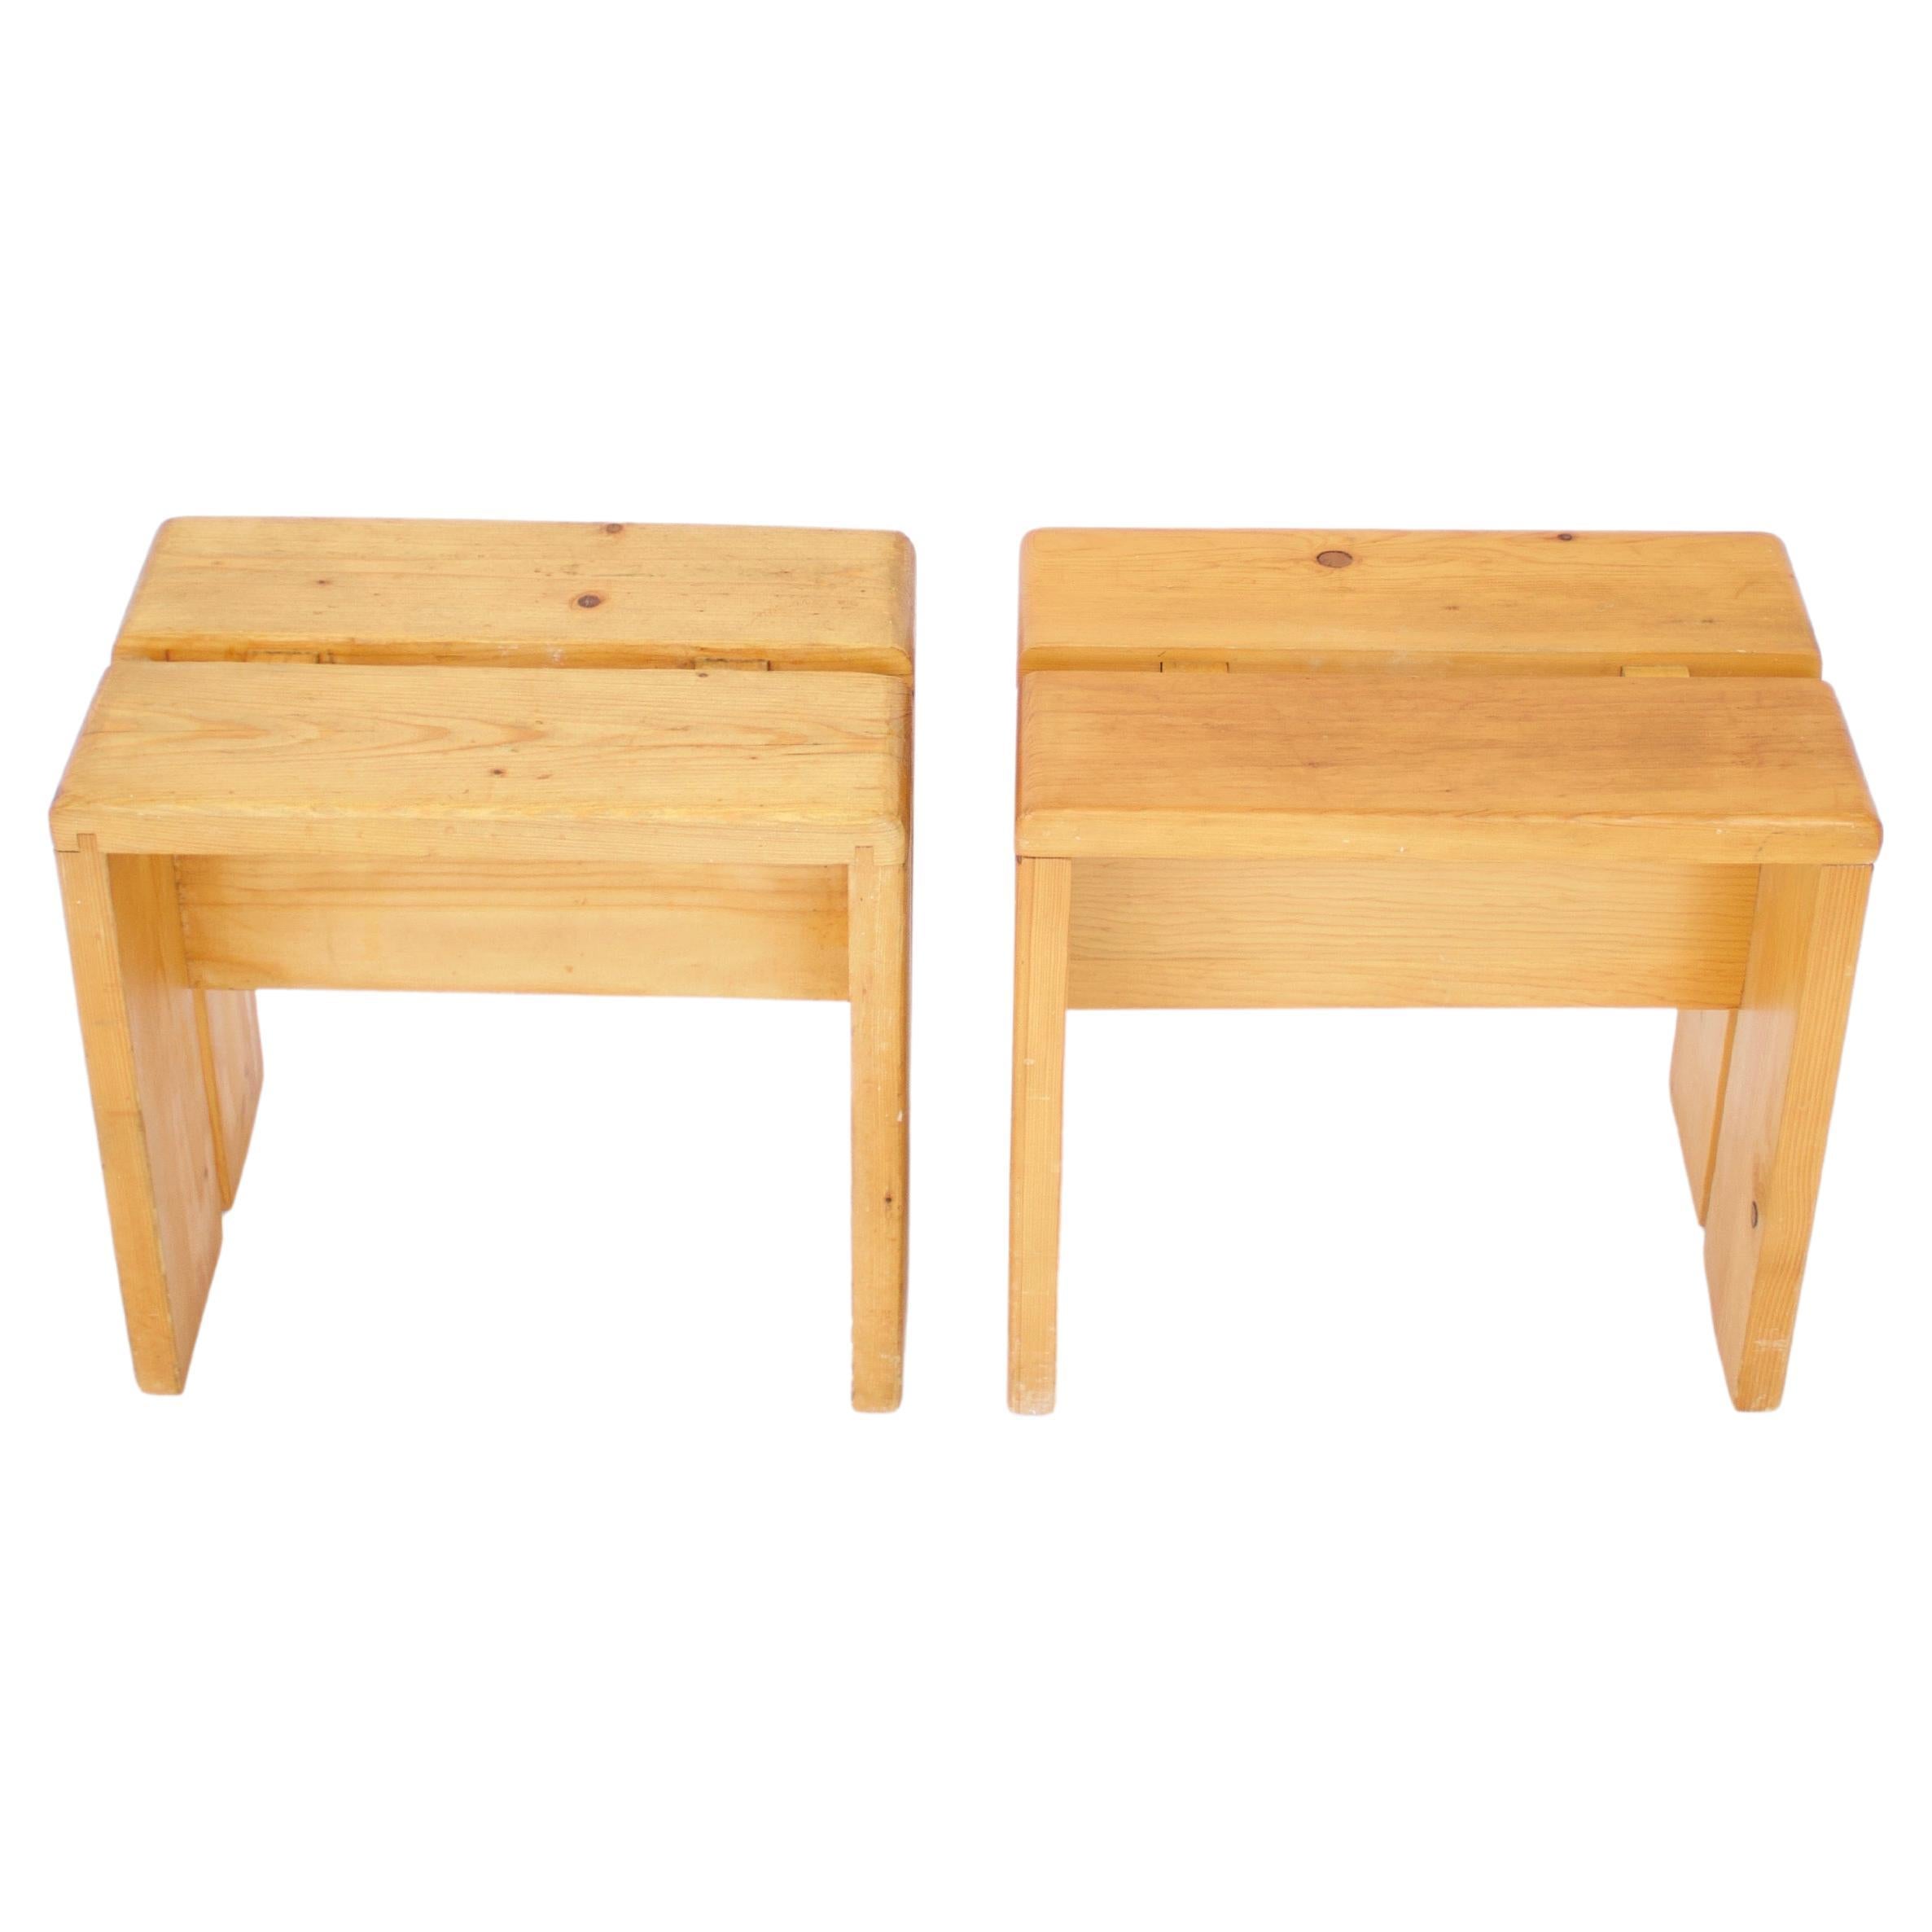 Mid-Century Modern Charlotte Perriand Pine Wood Stools for Les Arcs Ski Resort, France, circa 1960 For Sale